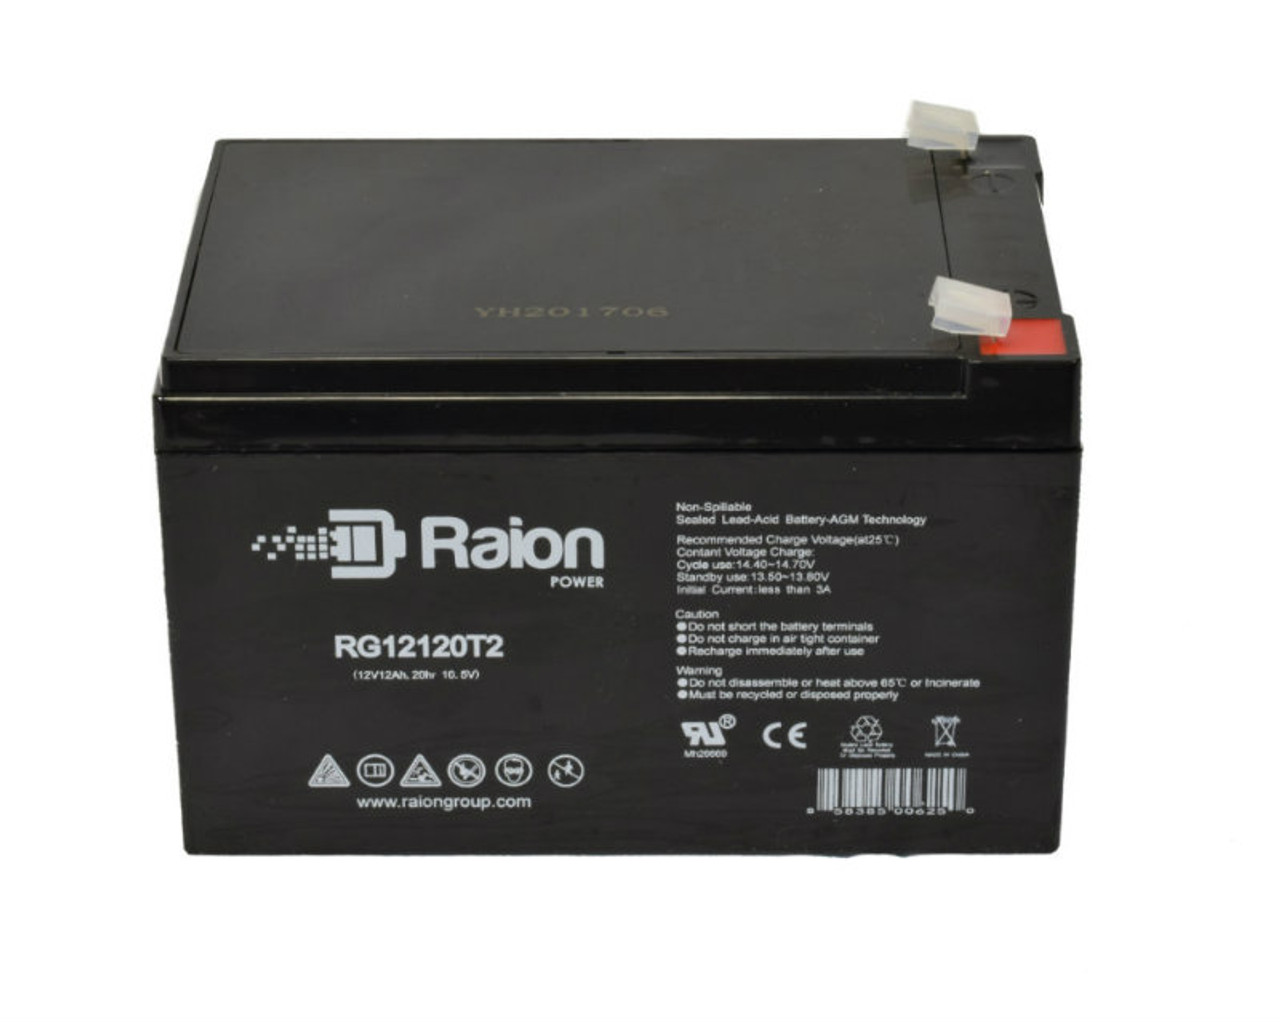 Raion Power RG12120T2 Replacement Battery Cartridge for Minuteman E2300i